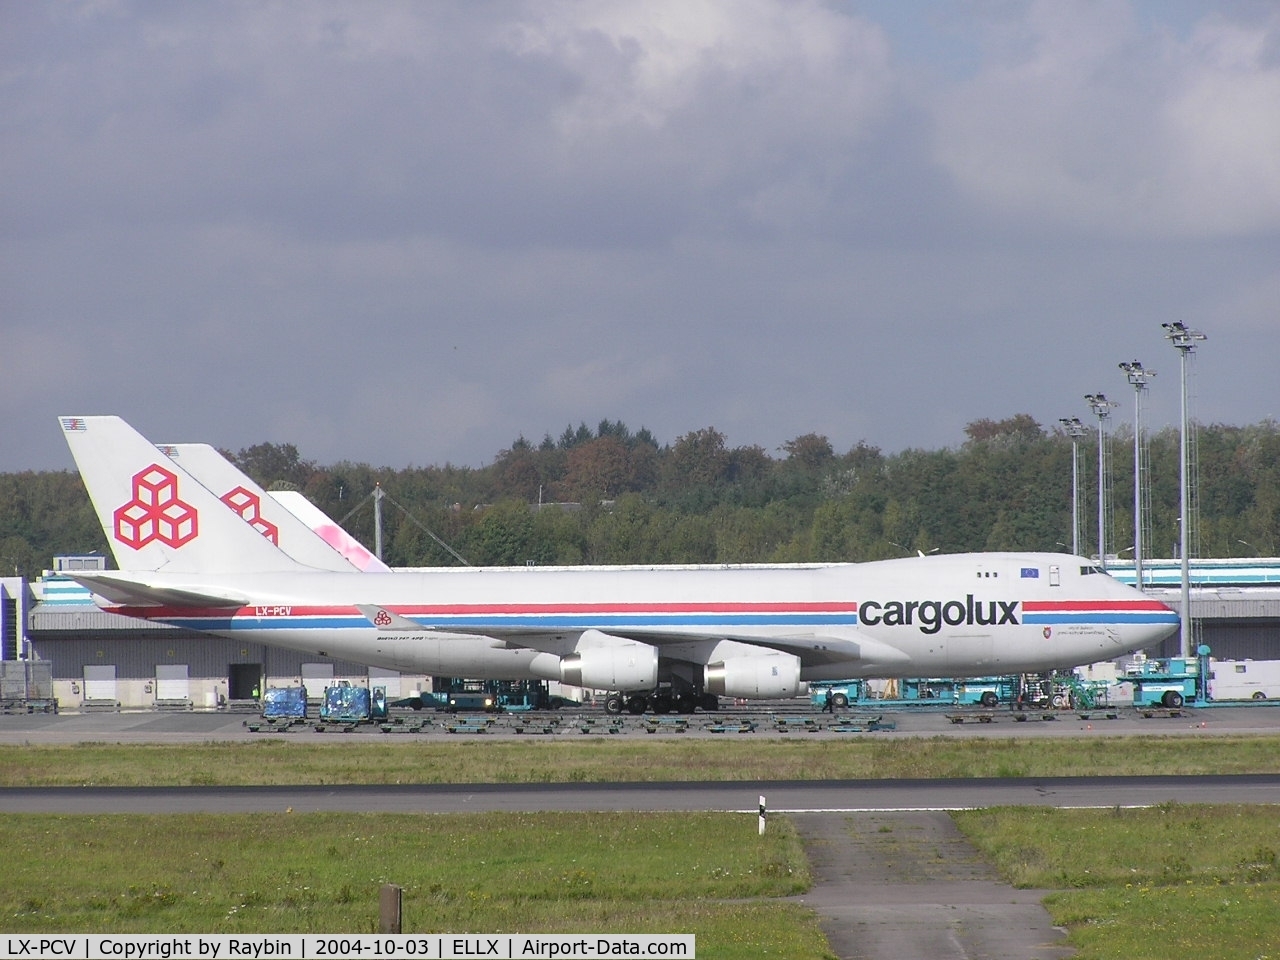 LX-PCV, 1999 Boeing 747-4R7F/SCD C/N 29732, Cargolux
Now flying as 4K-SW008 for Silkway West Airlines